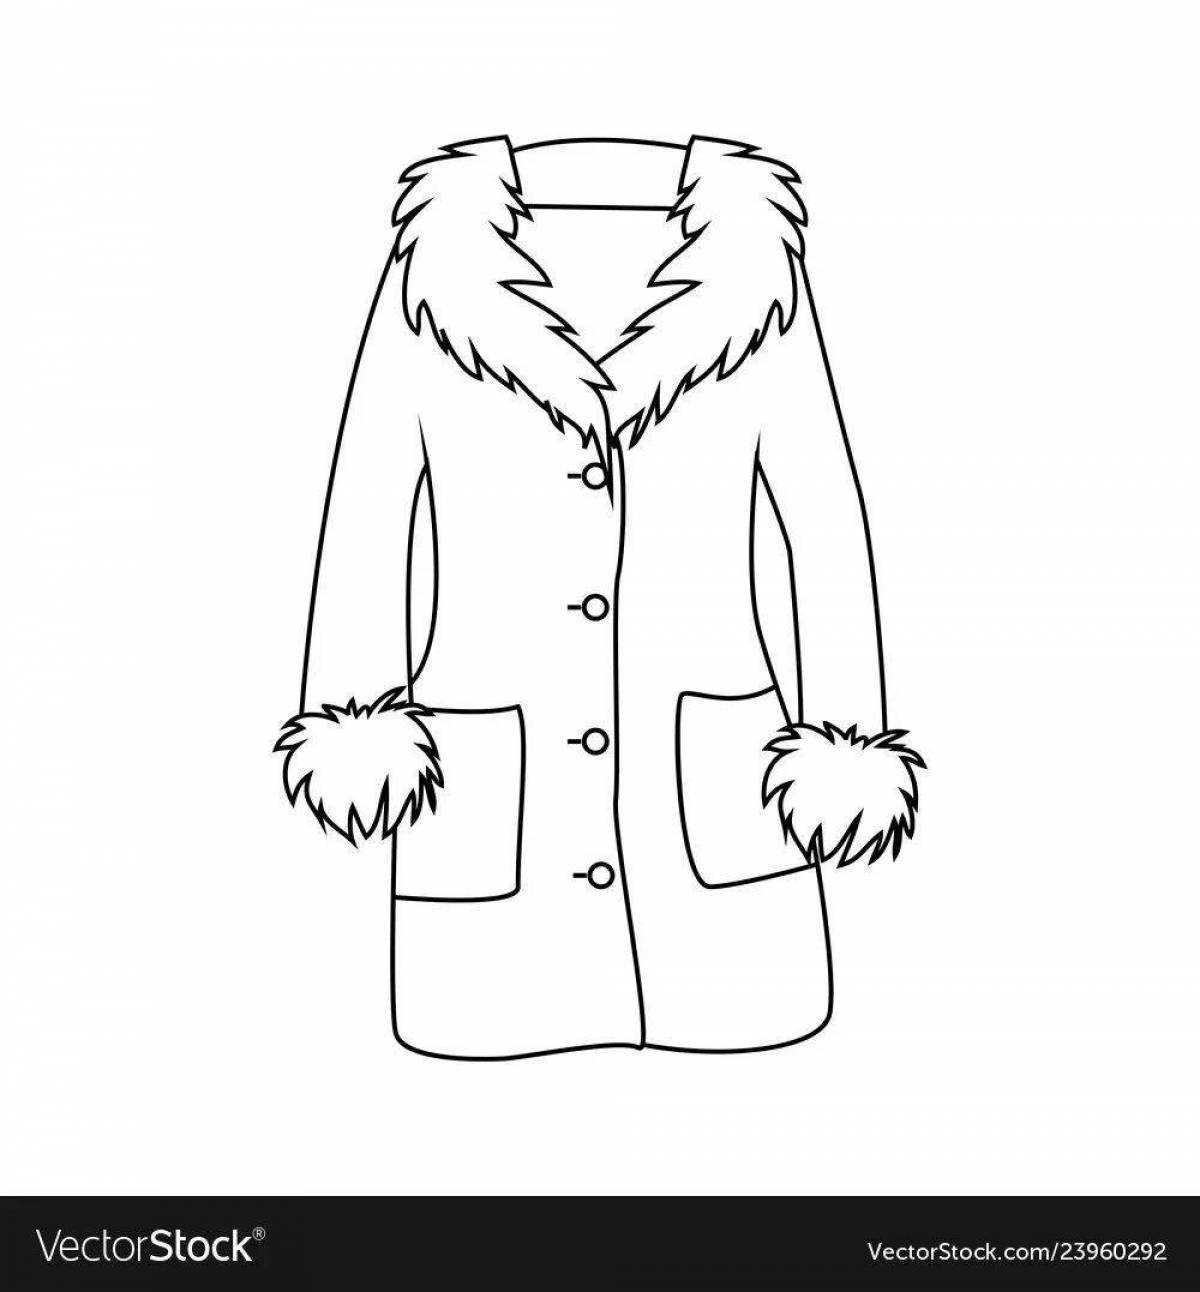 Playful coat coloring page